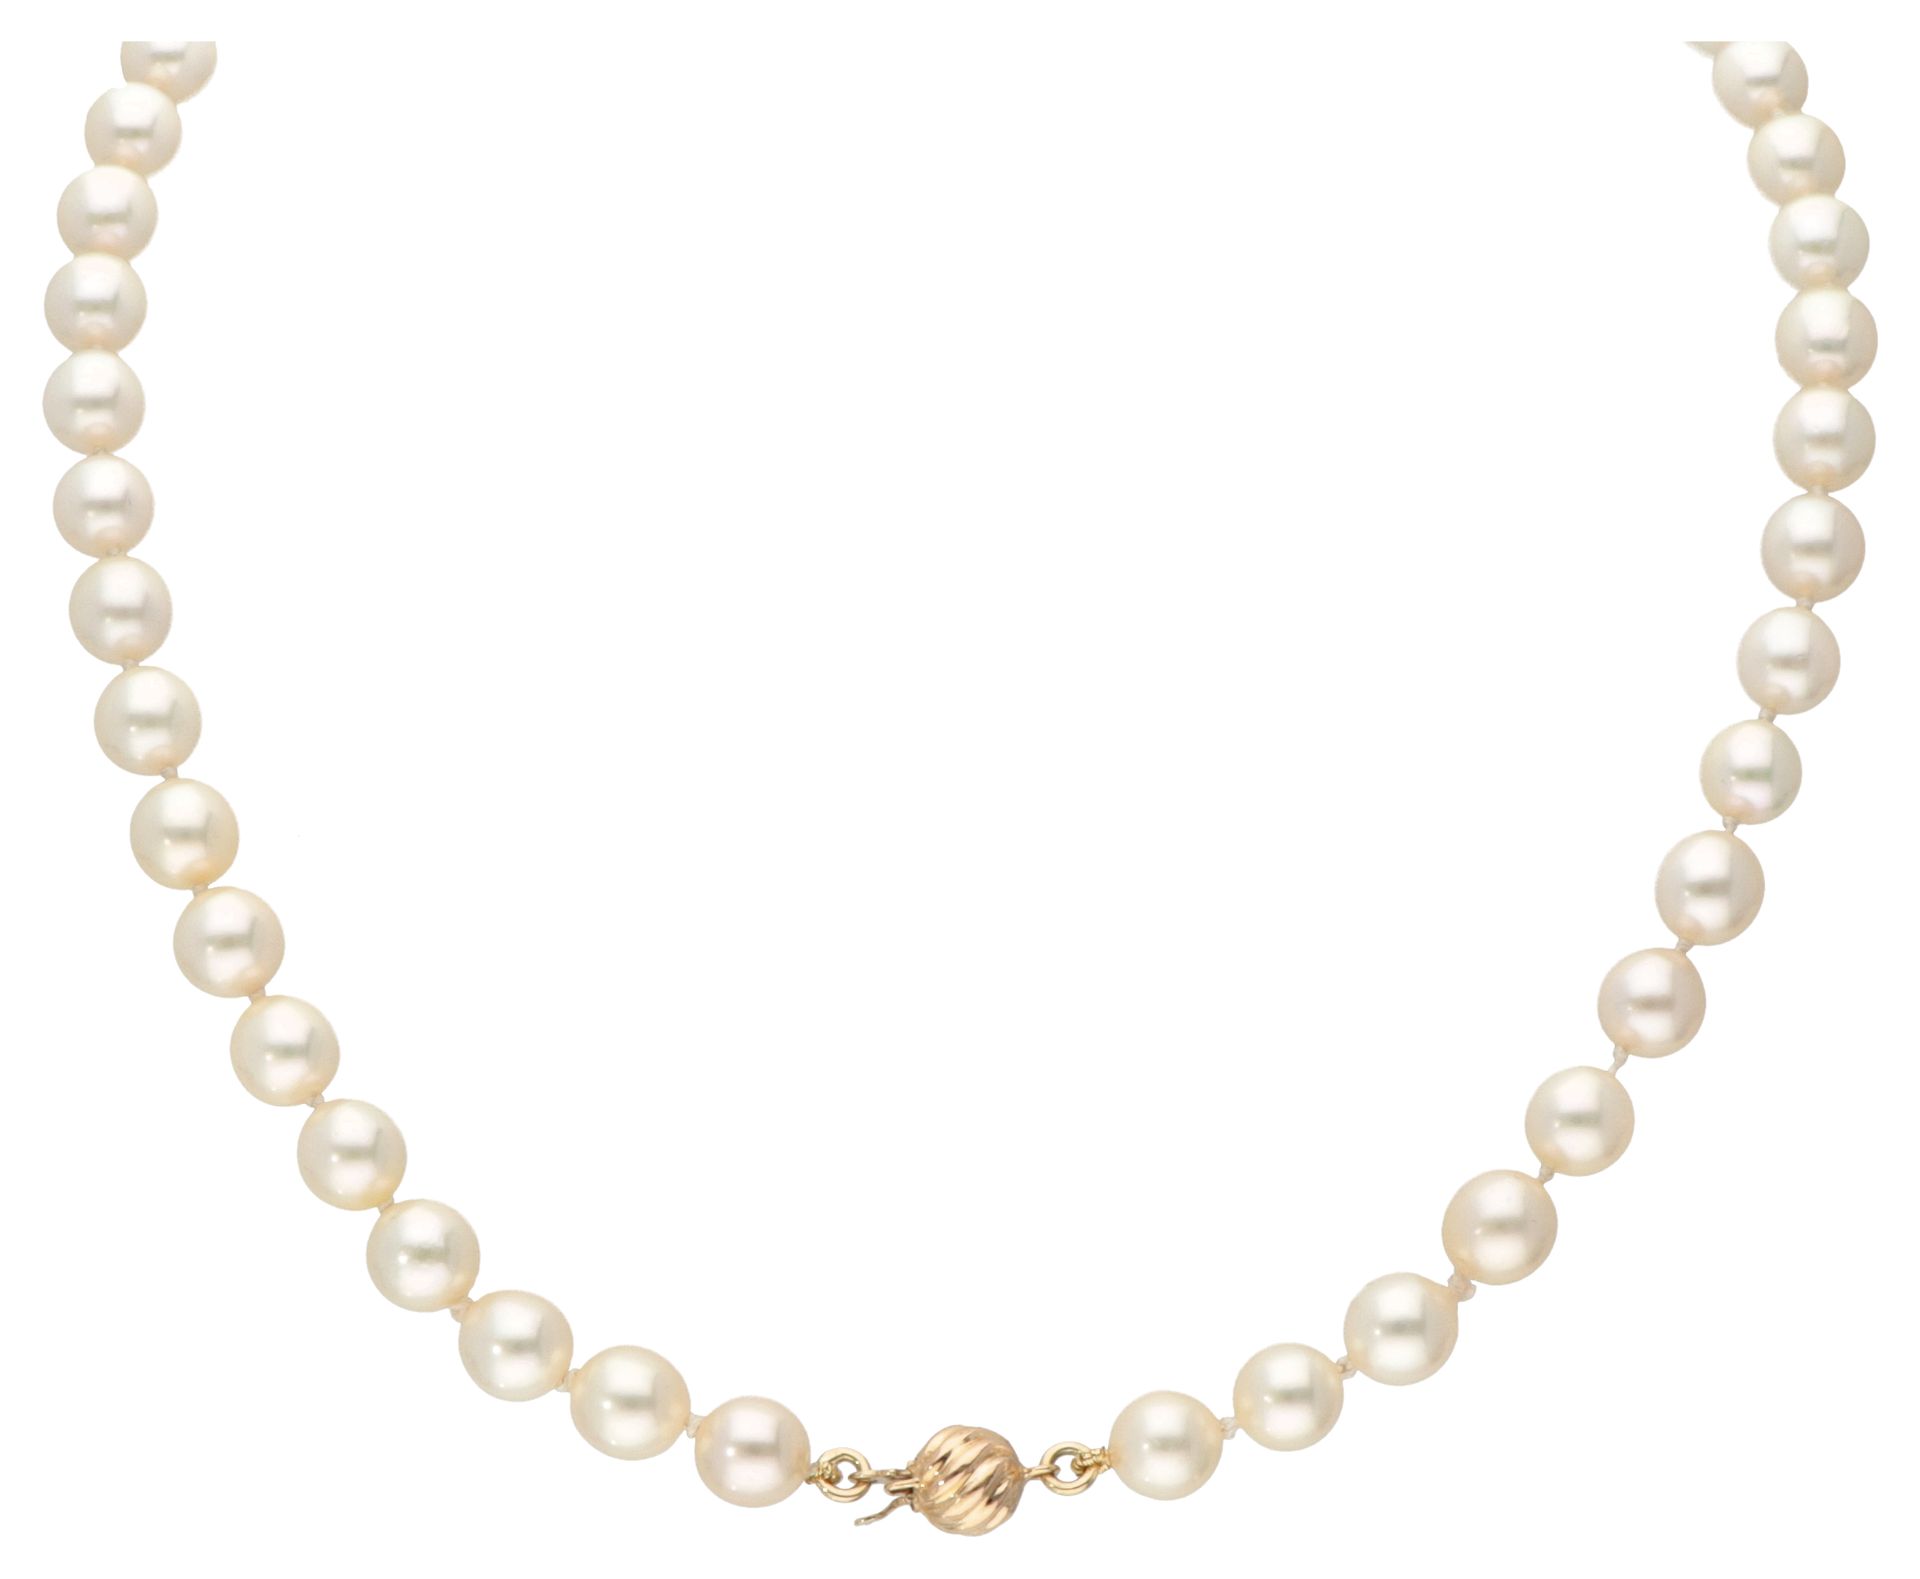 Saltwater pearl necklace with a 14K. Yellow gold closure. Hallmarks: 585. In ver&hellip;